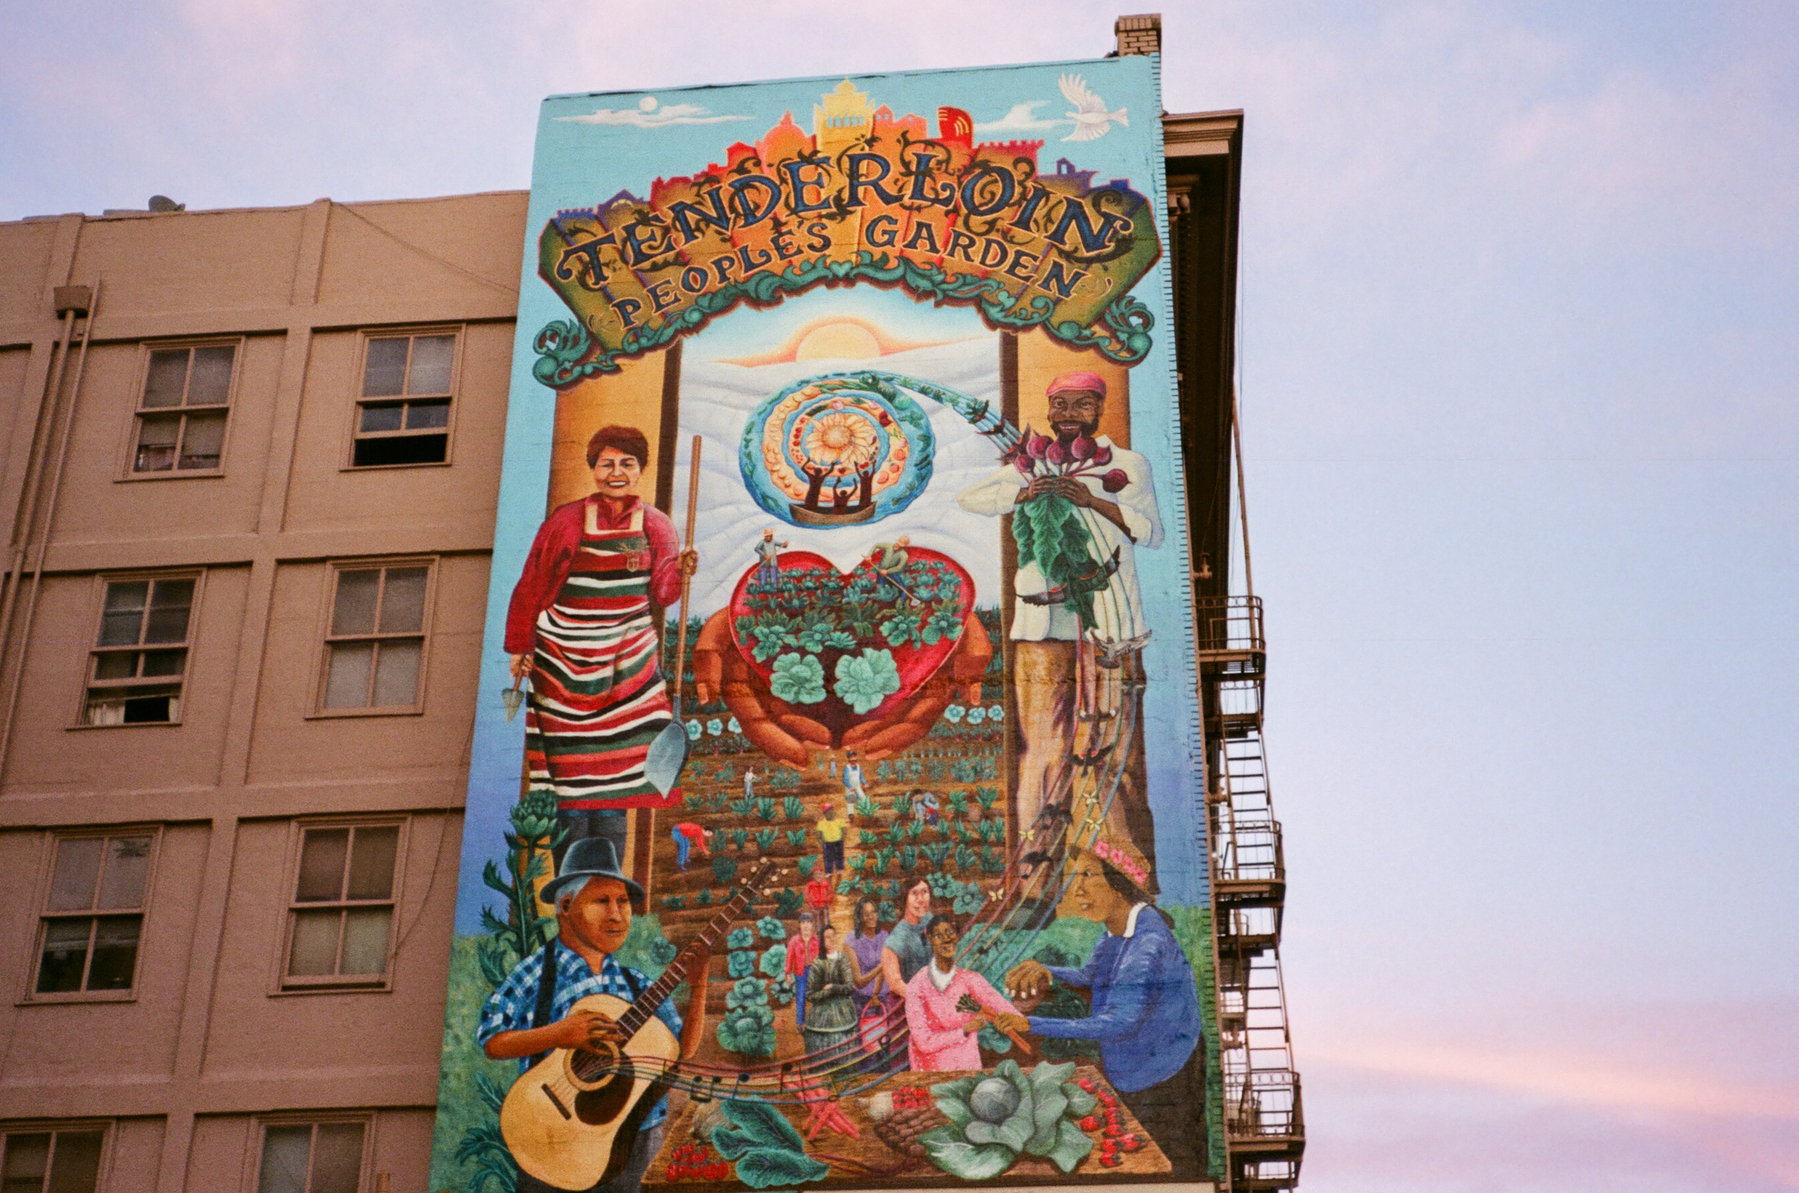 A color photograph of a large mural which reads Tenderloin People's Garden on a building. Blue and pink sky in the background